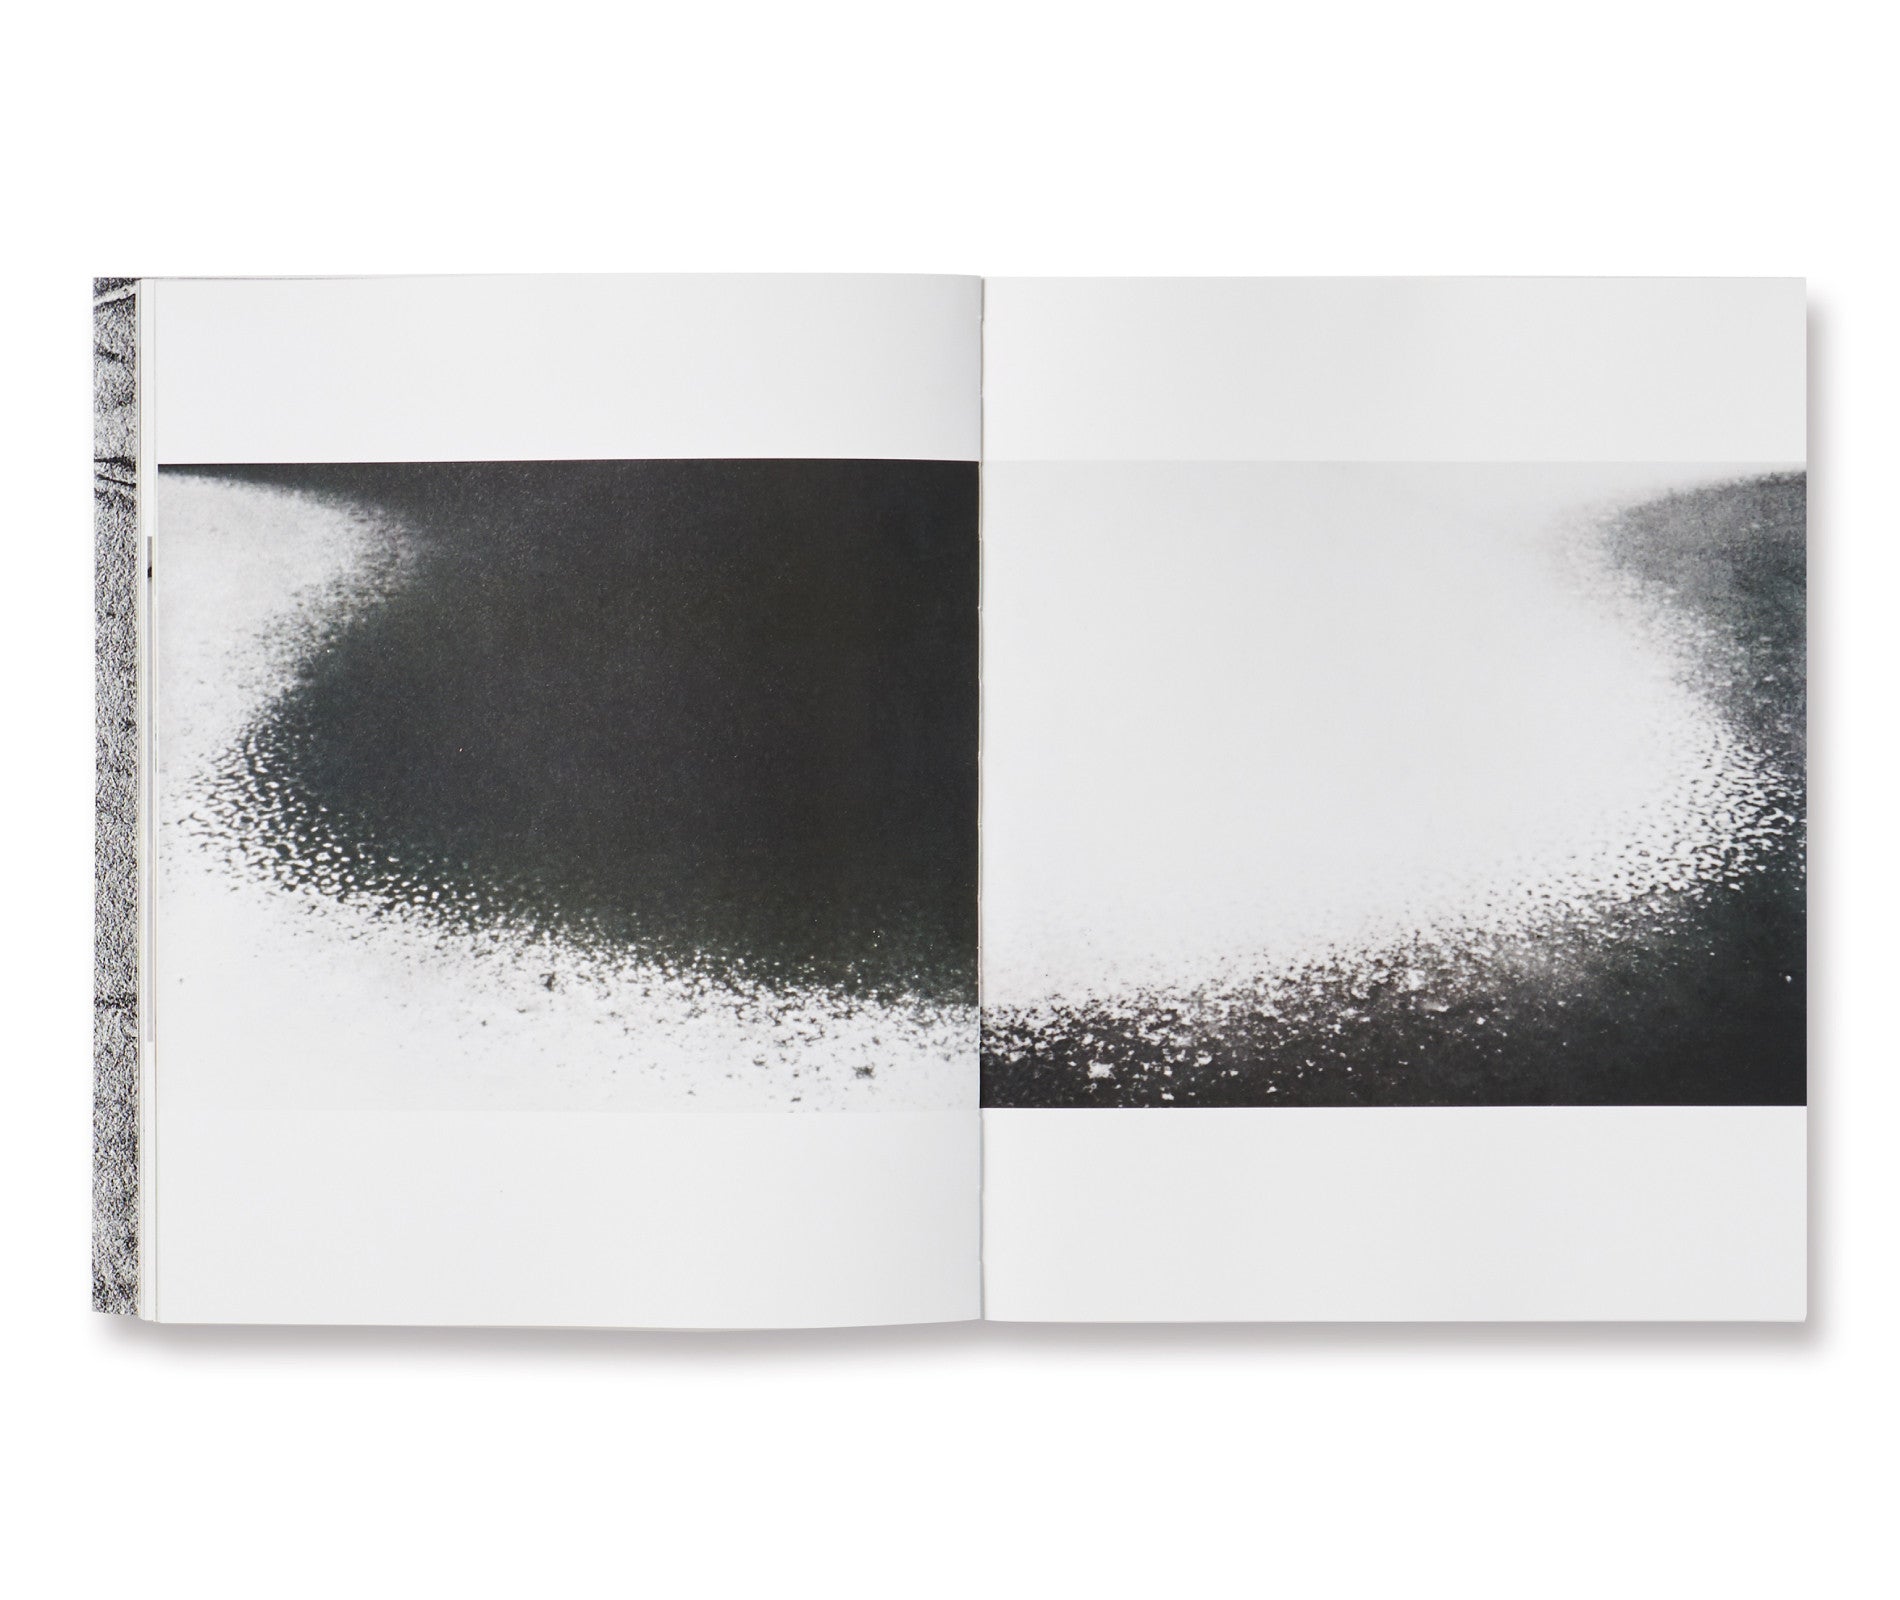 ABSTRACTS by AM projects [SIGNED BY DAISUKE YOKOTA]